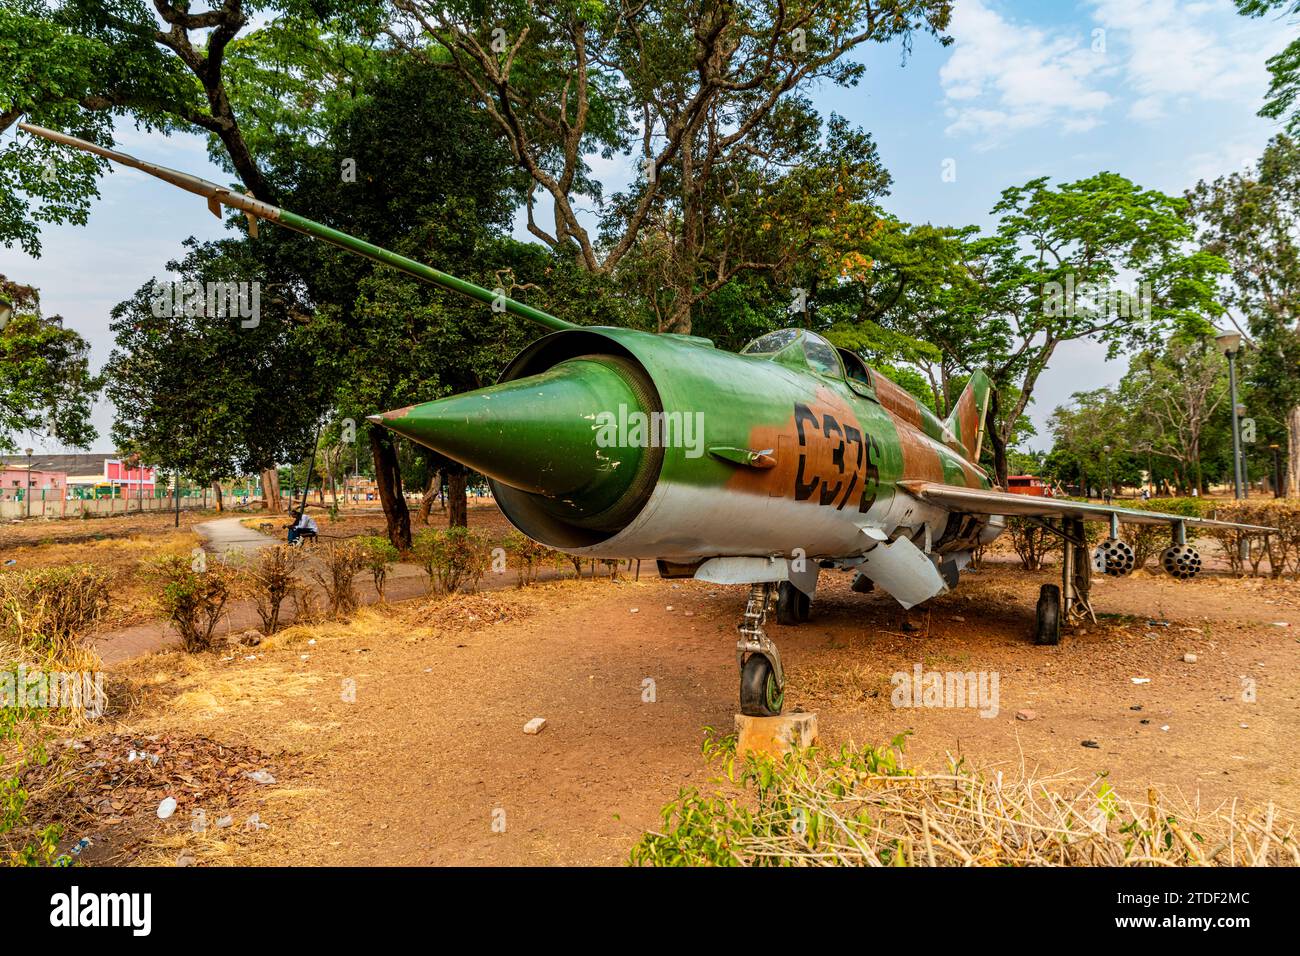 Former military jet in a park, Luena, Moxico, Angola, Africa Stock Photo